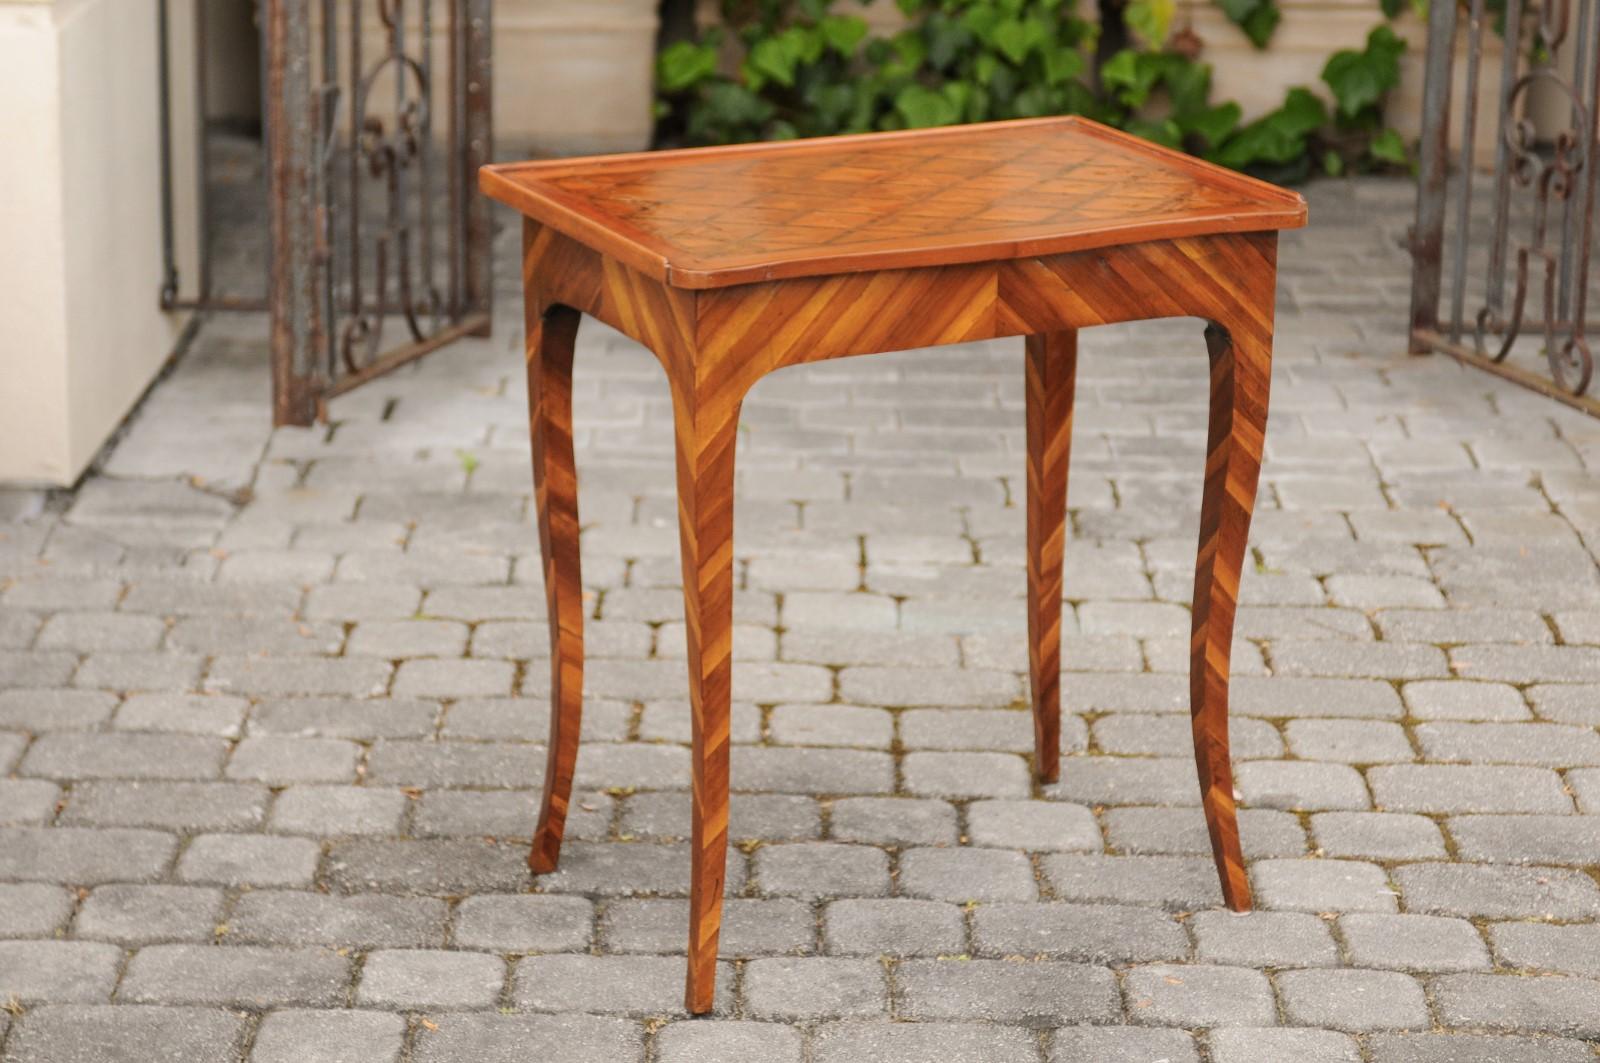 Italian 1820s Walnut Side Table with Marquetry Top, Inlaid Legs and Side Drawer In Good Condition For Sale In Atlanta, GA